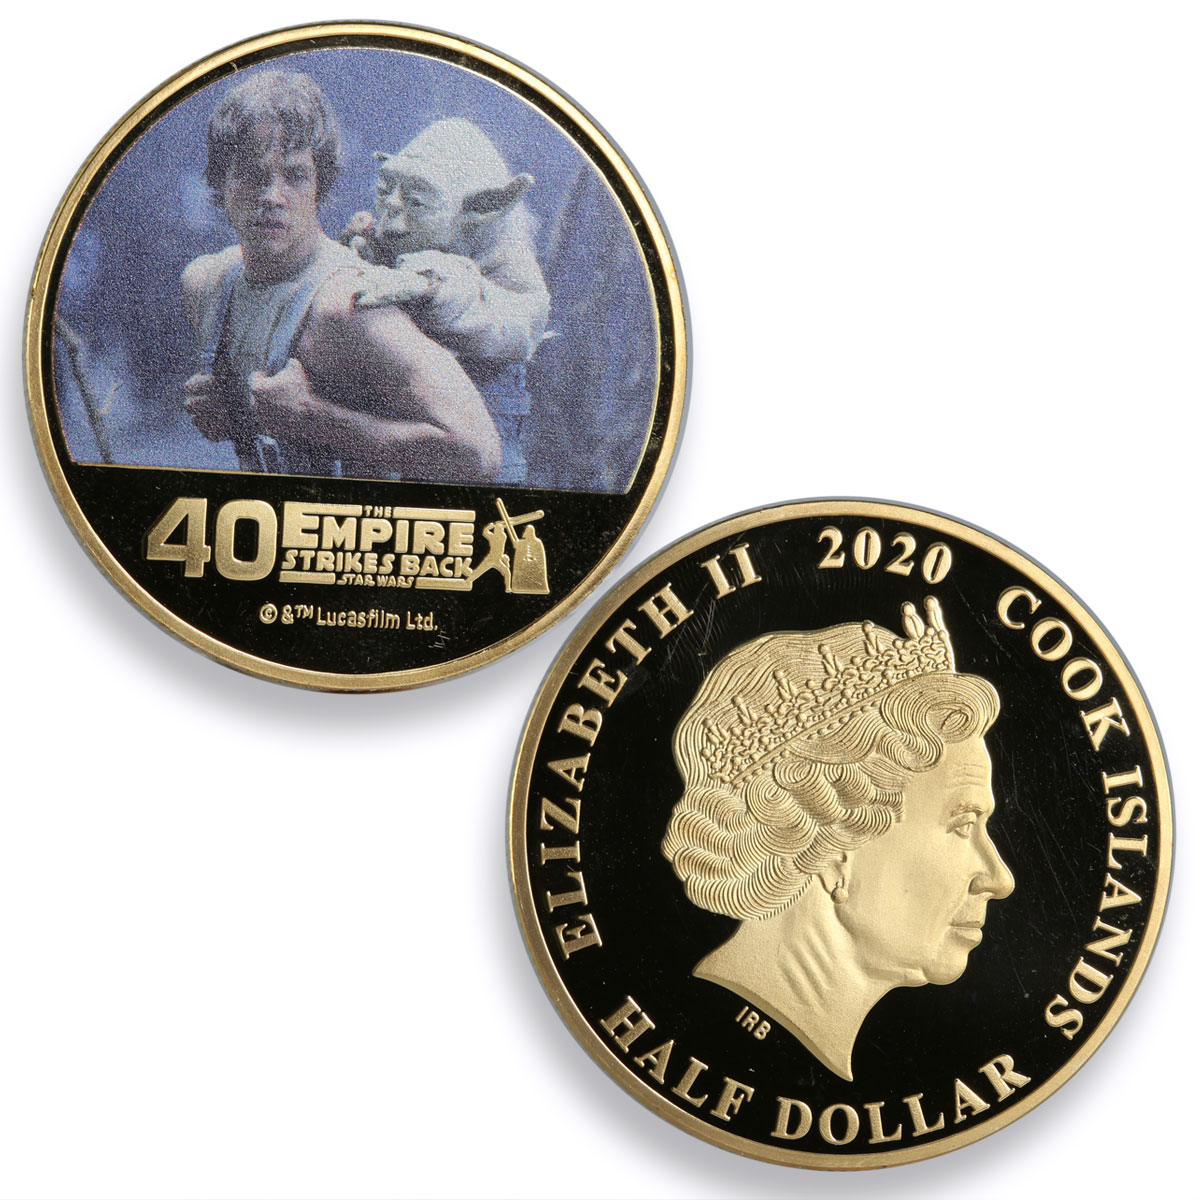 Niue set of 3 coins Star Wars Empire Strikes Back gilded CuNi coins 2020